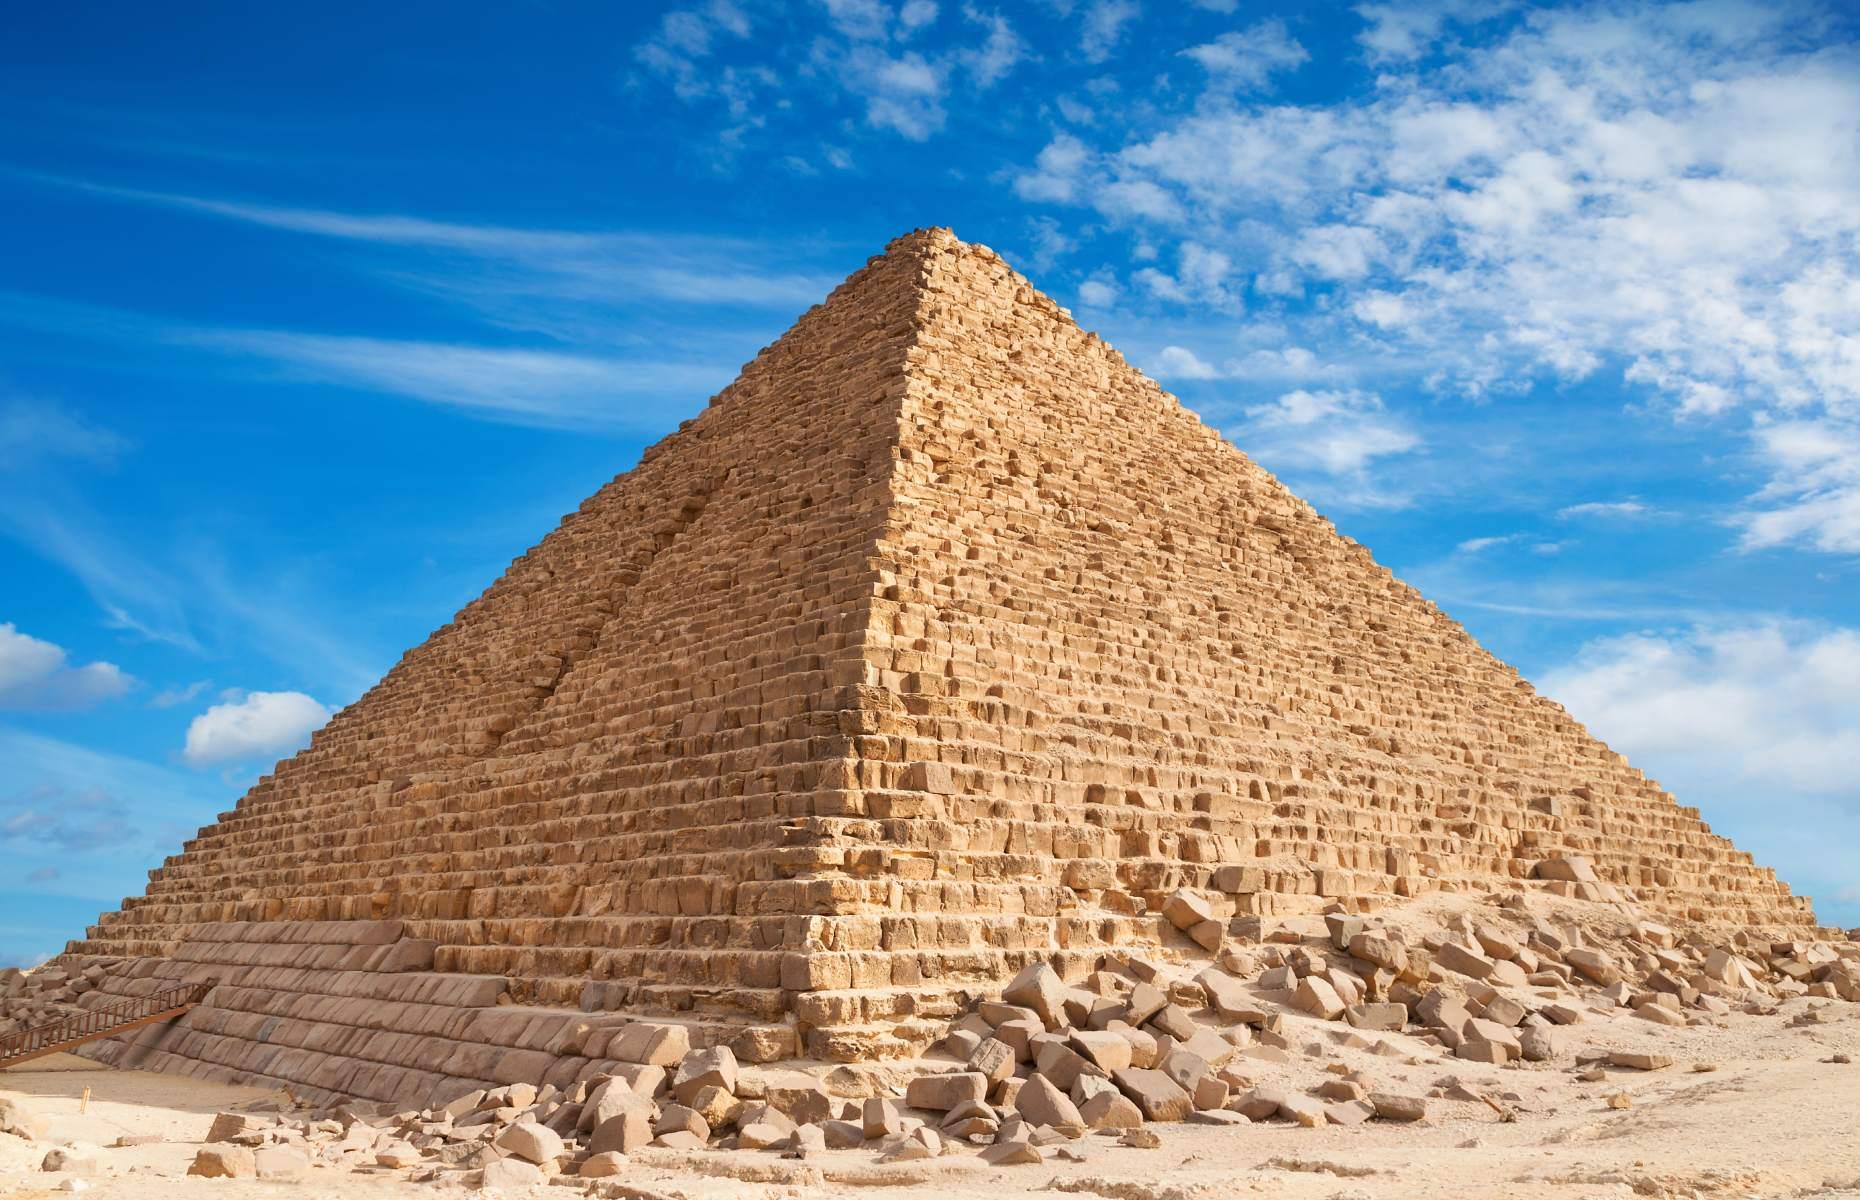 <p>The Great Pyramids of Giza complex consists of three pyramids, each named after the king they contained: Khufu, Khafre and Menkaure. The Khufu Pyramid is the largest of the three, standing at a height of 482 feet (147m). It was constructed between 2550 and 2490 BC, using a whopping 2.3 million stone blocks. Khufu ruled between 2589 and 2566 BC and was the second pharaoh of the 4th dynasty. </p>